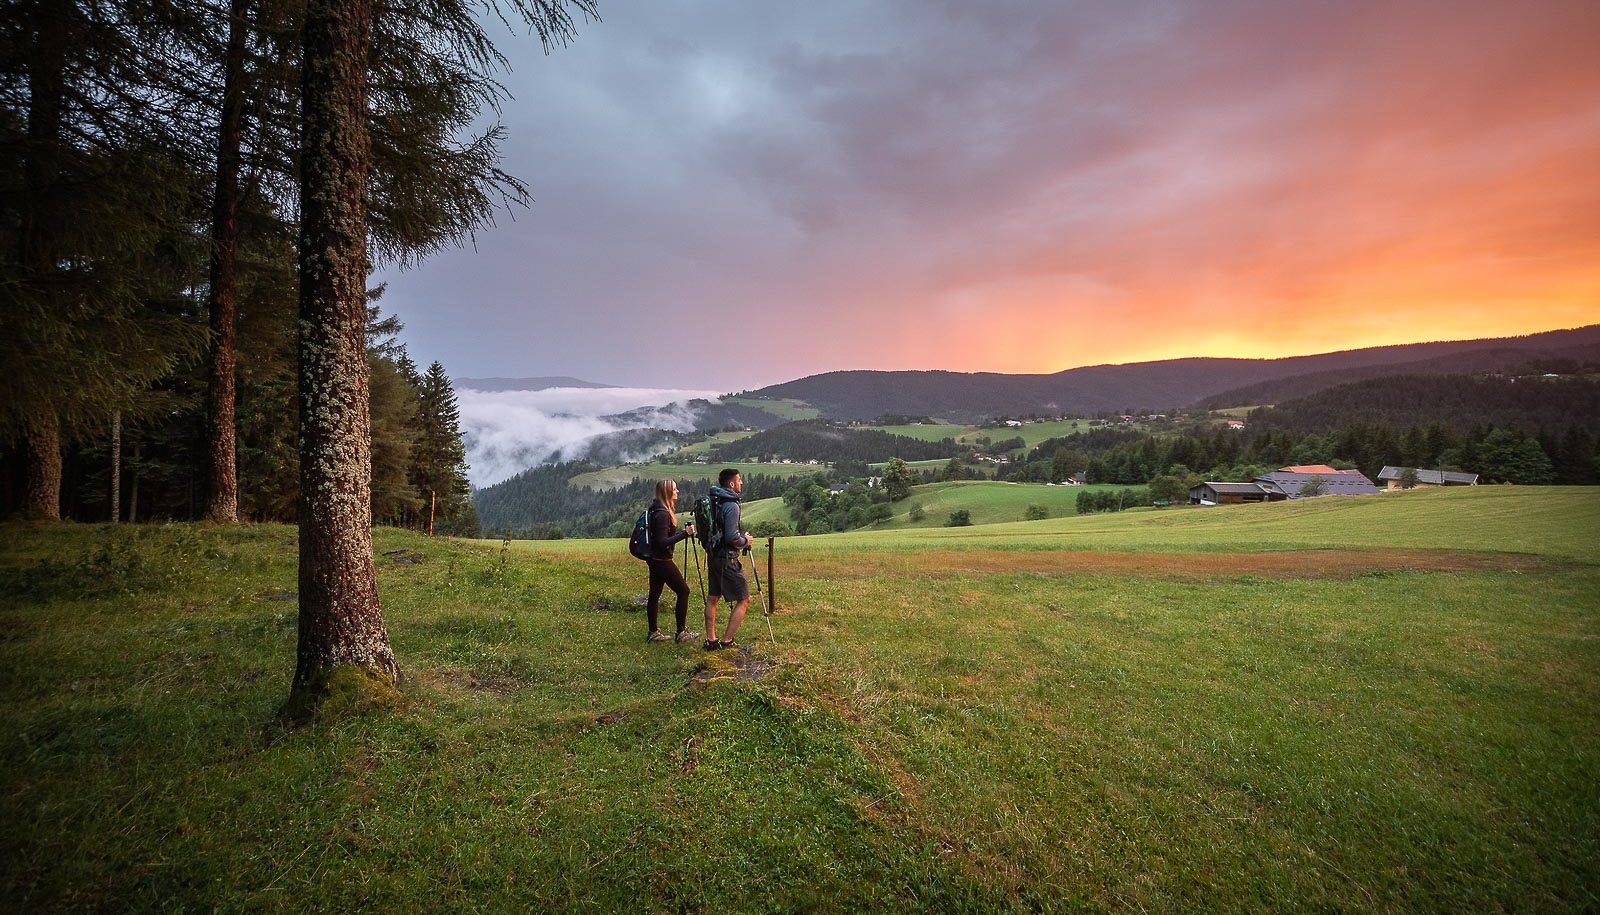 A couple on a walking trip across Pohorje hills enjoying colorful sunset in the countryside of Rogla.